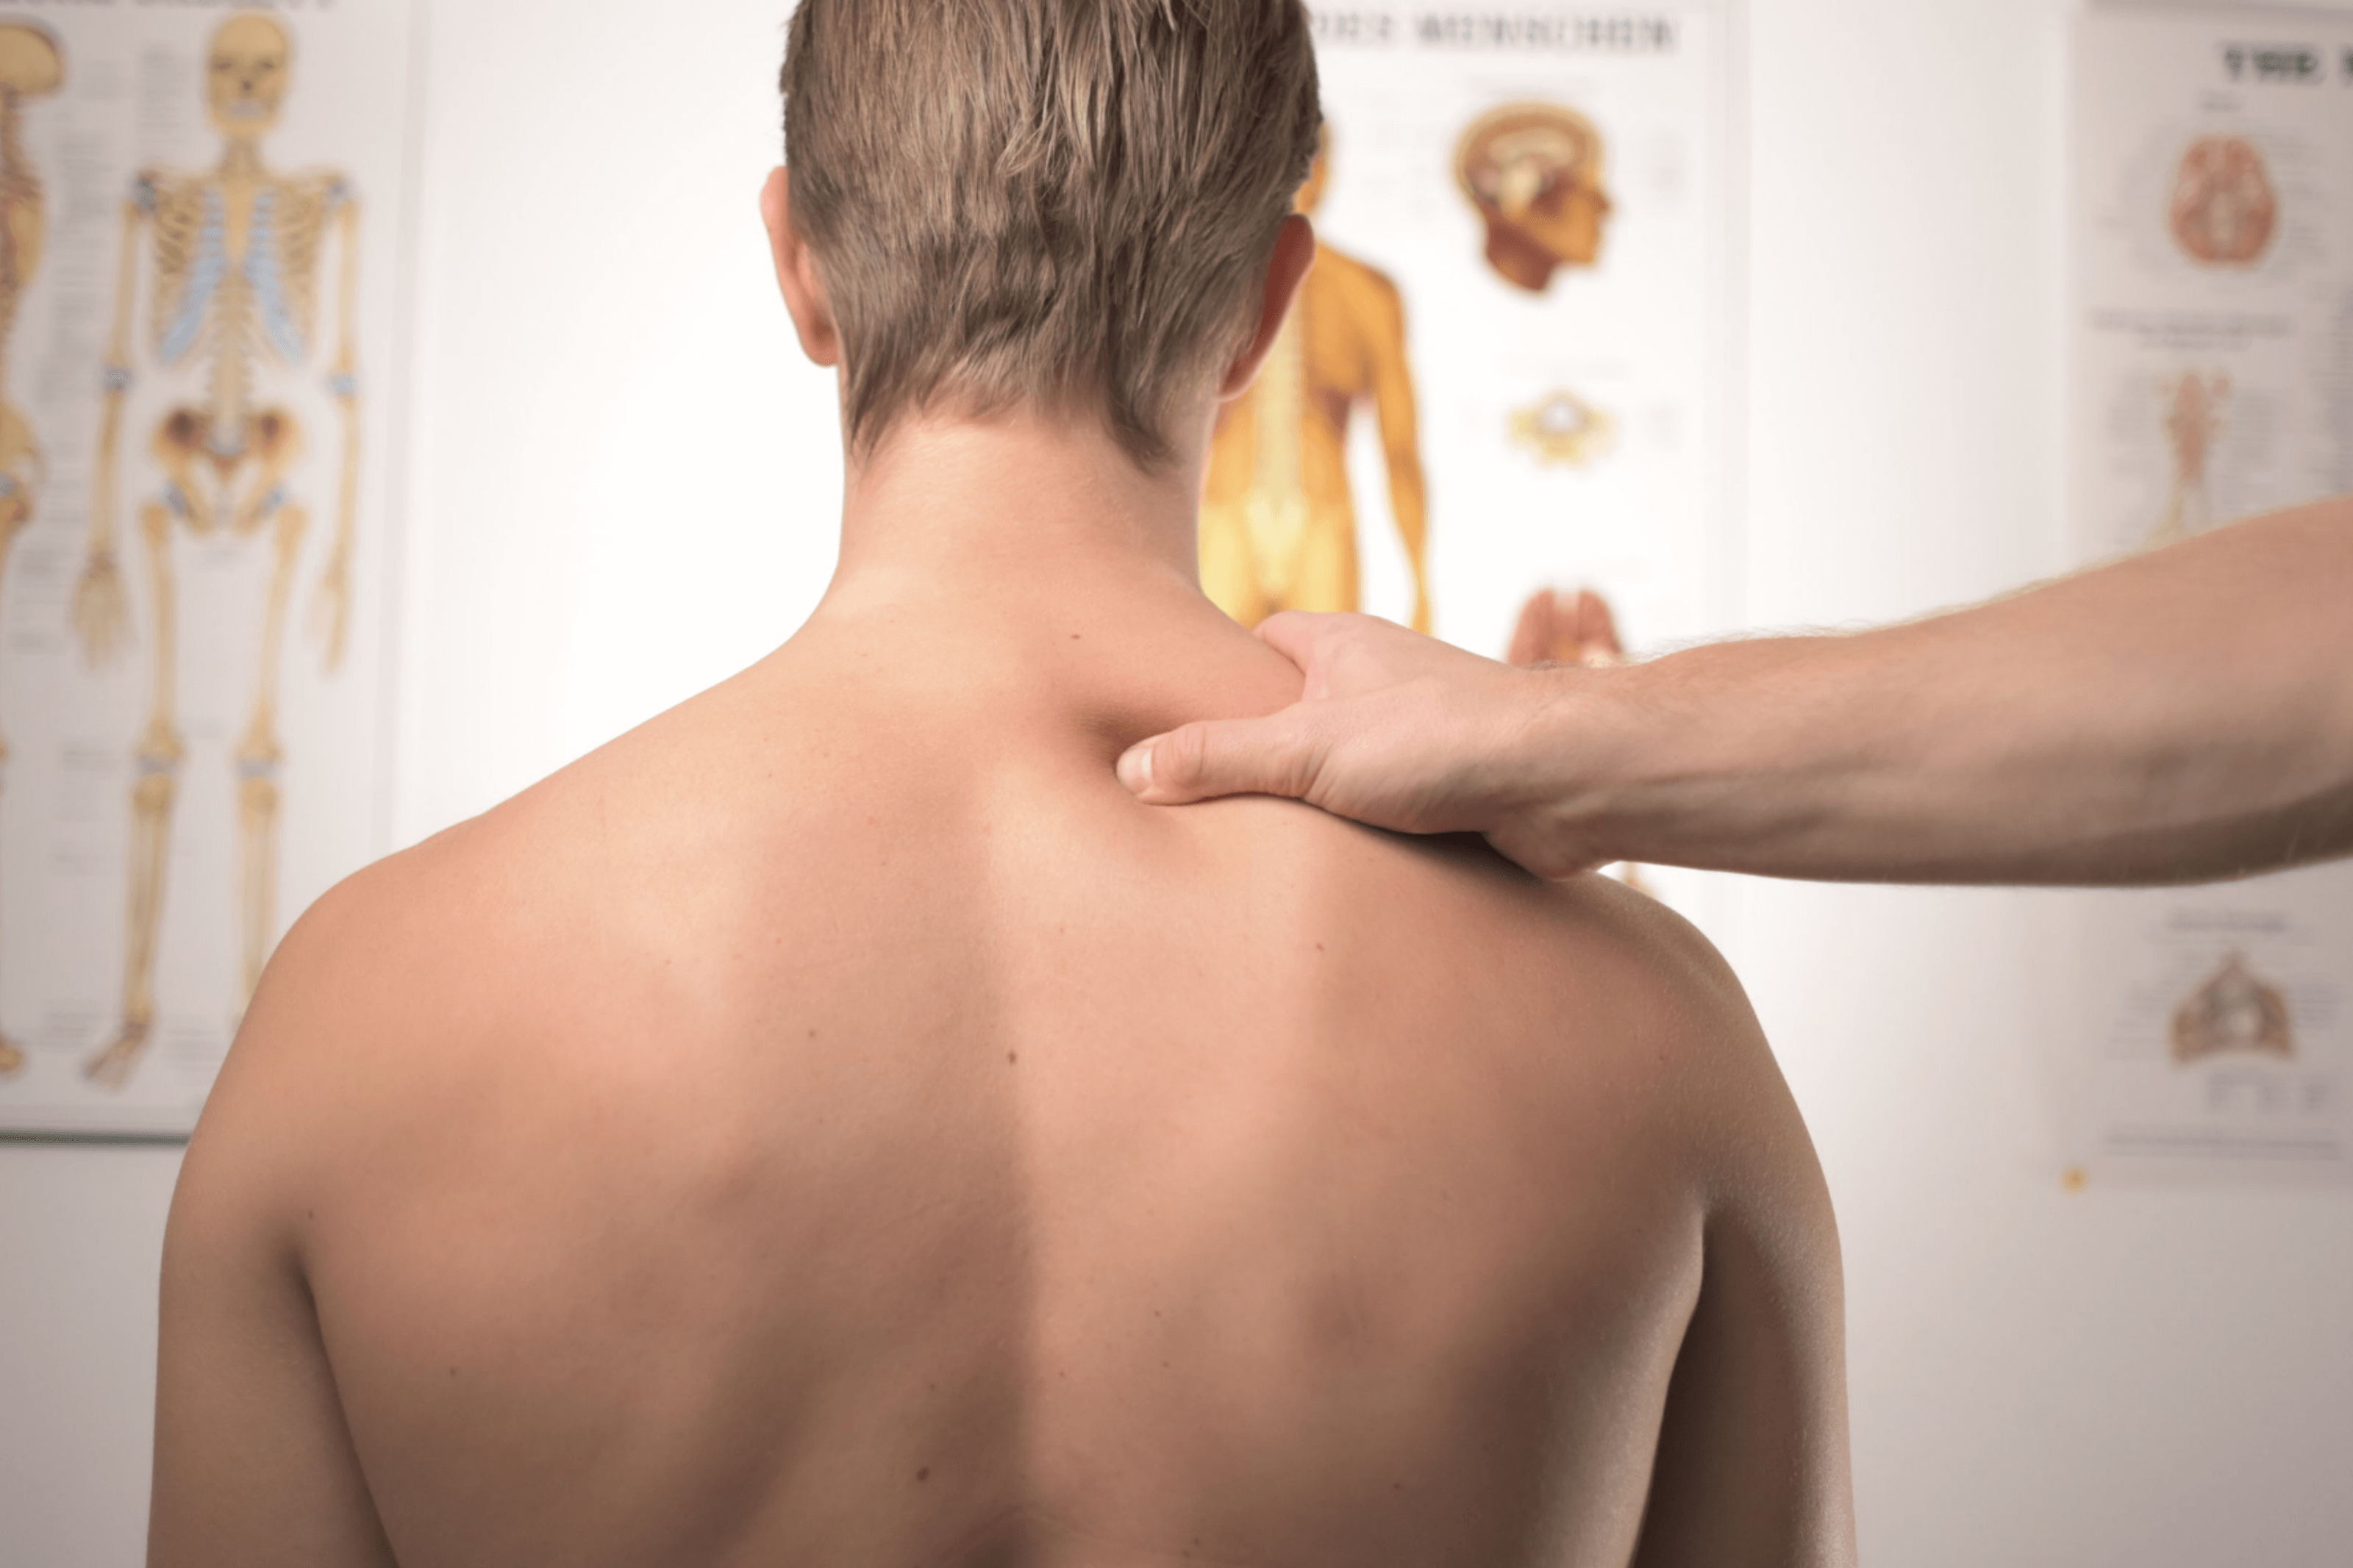 Getting the Right Male Massage Therapy for Low Back Pain - Royal